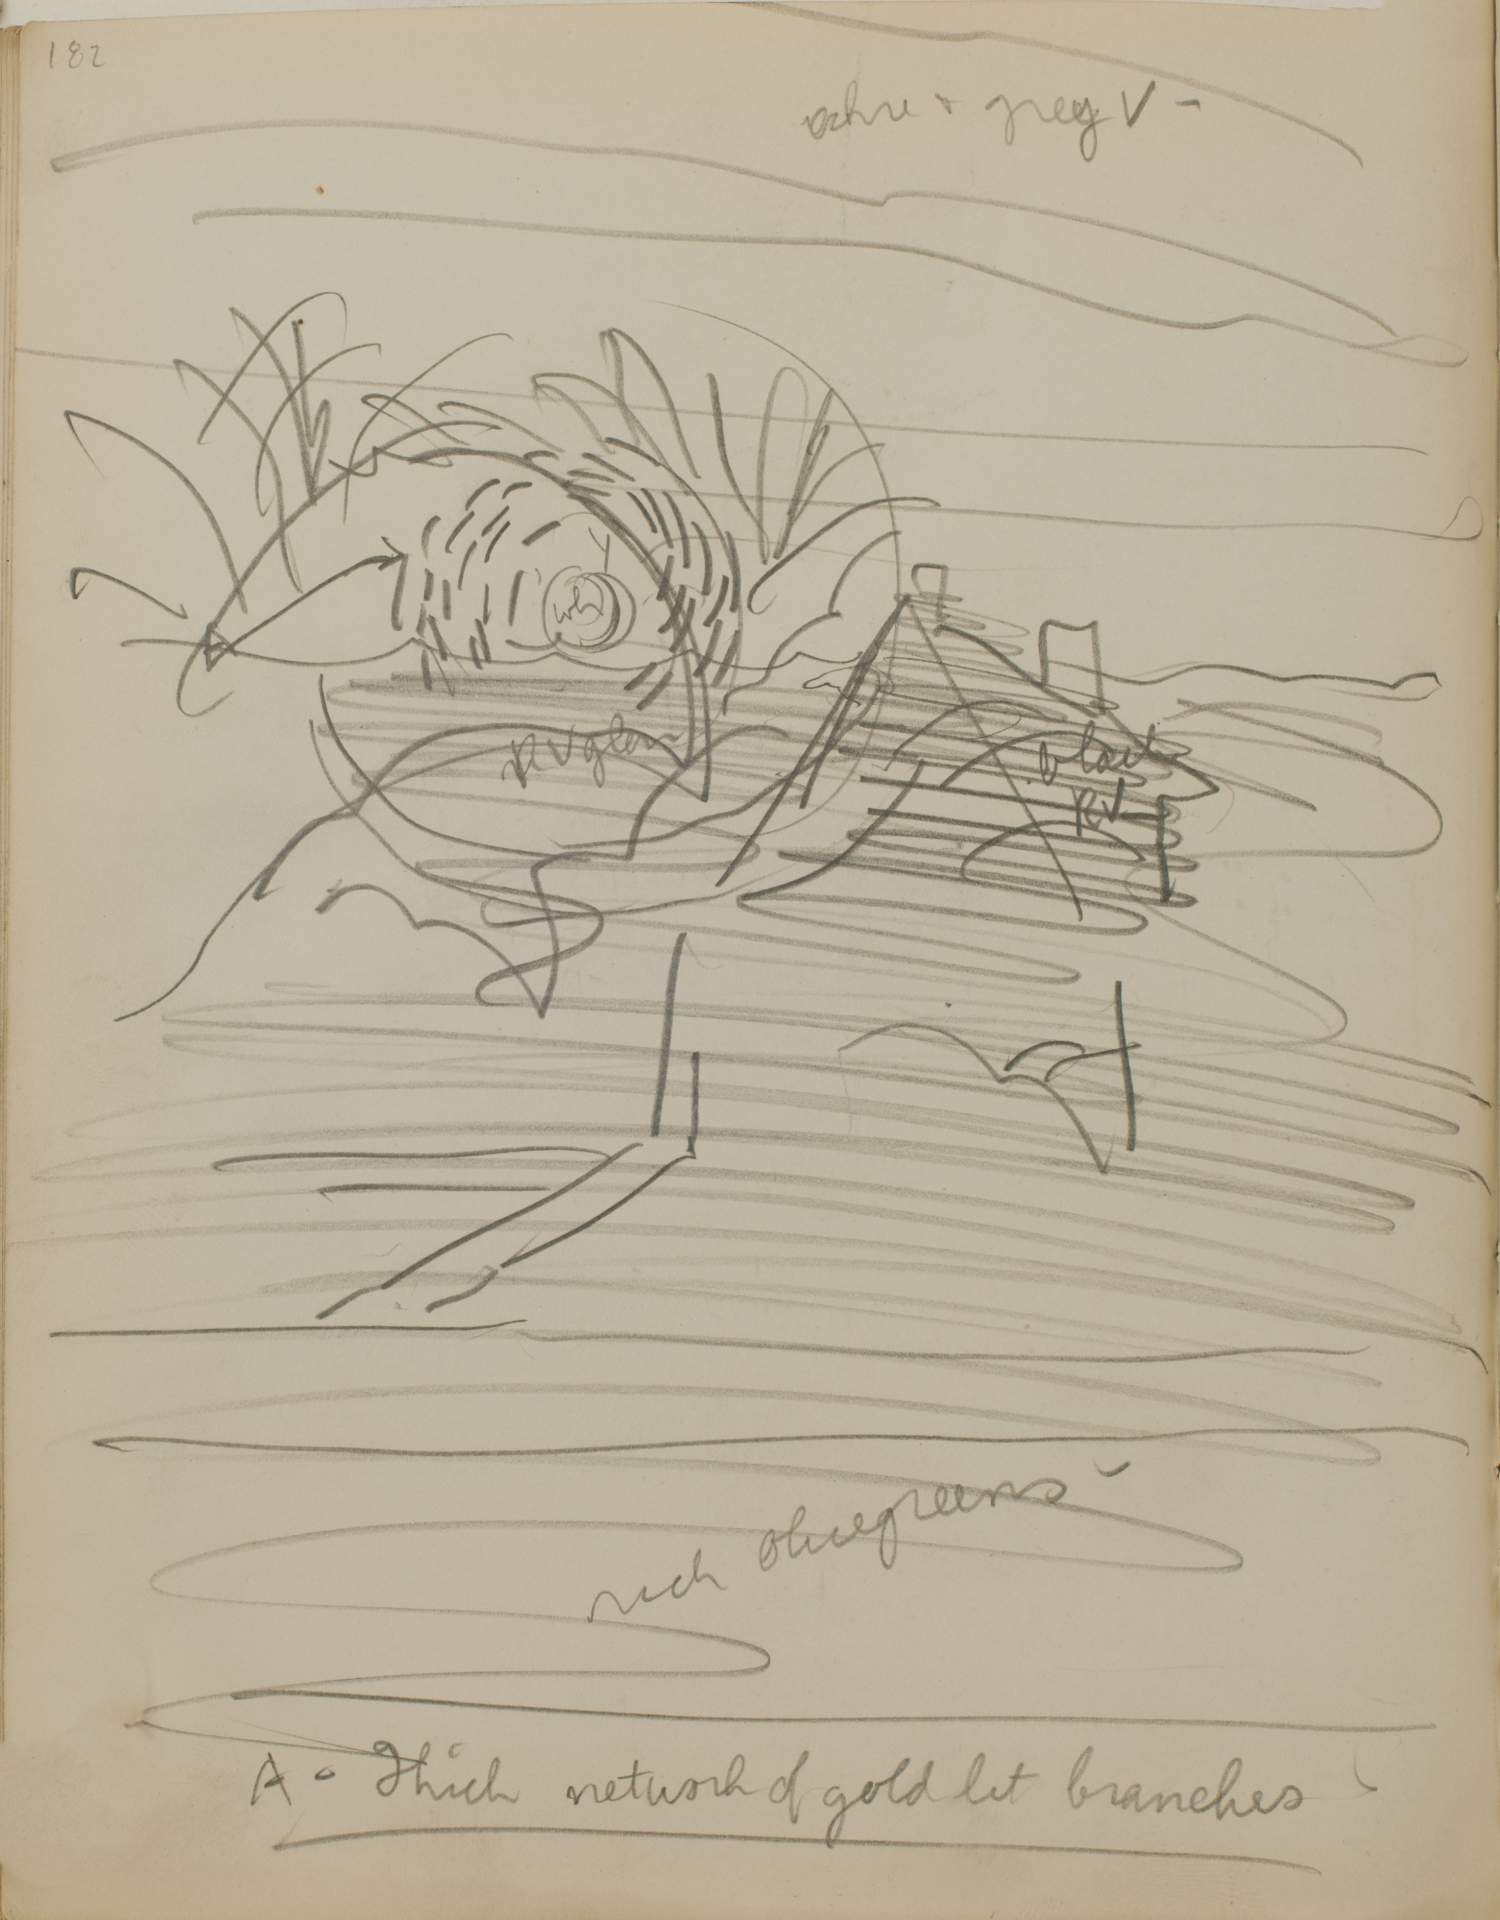 Untitled (sketch of building and sky)